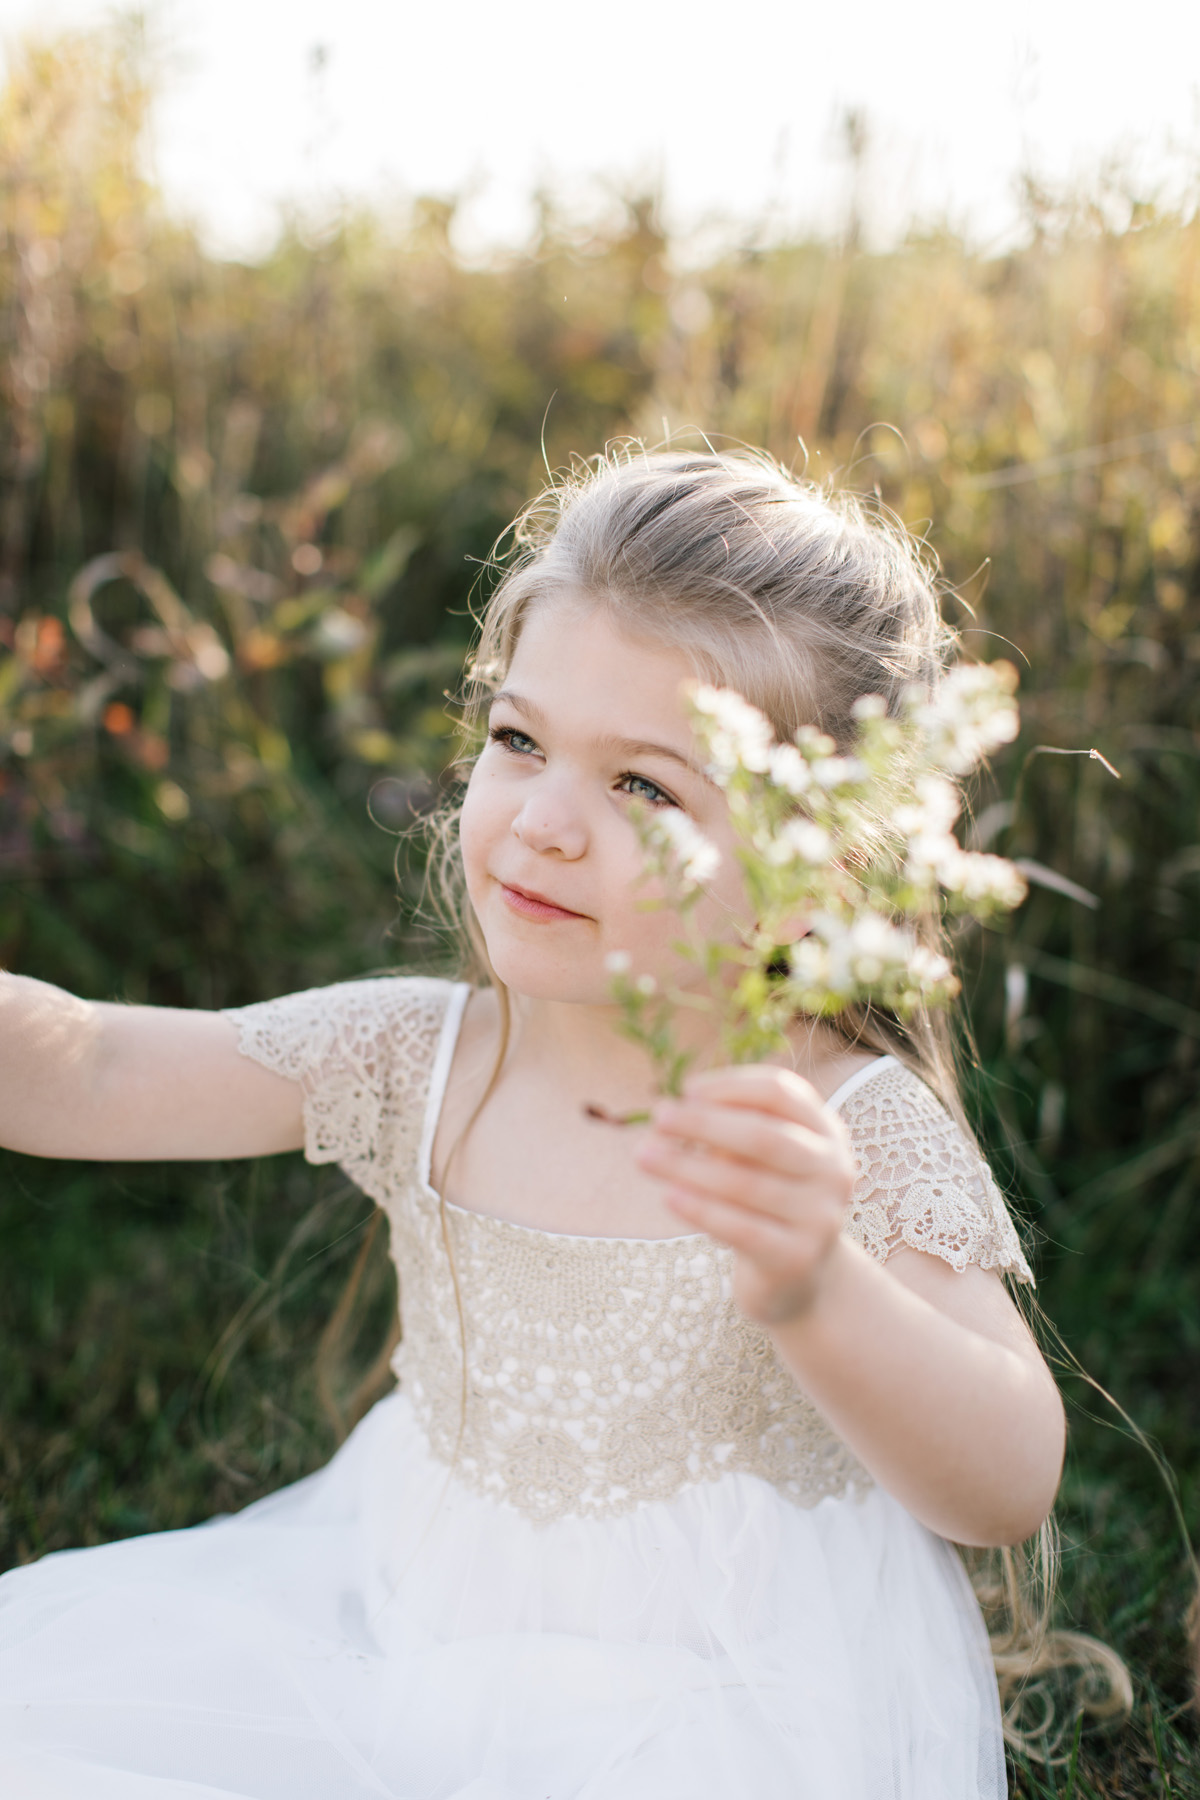 finding the light with a beautiful little girl